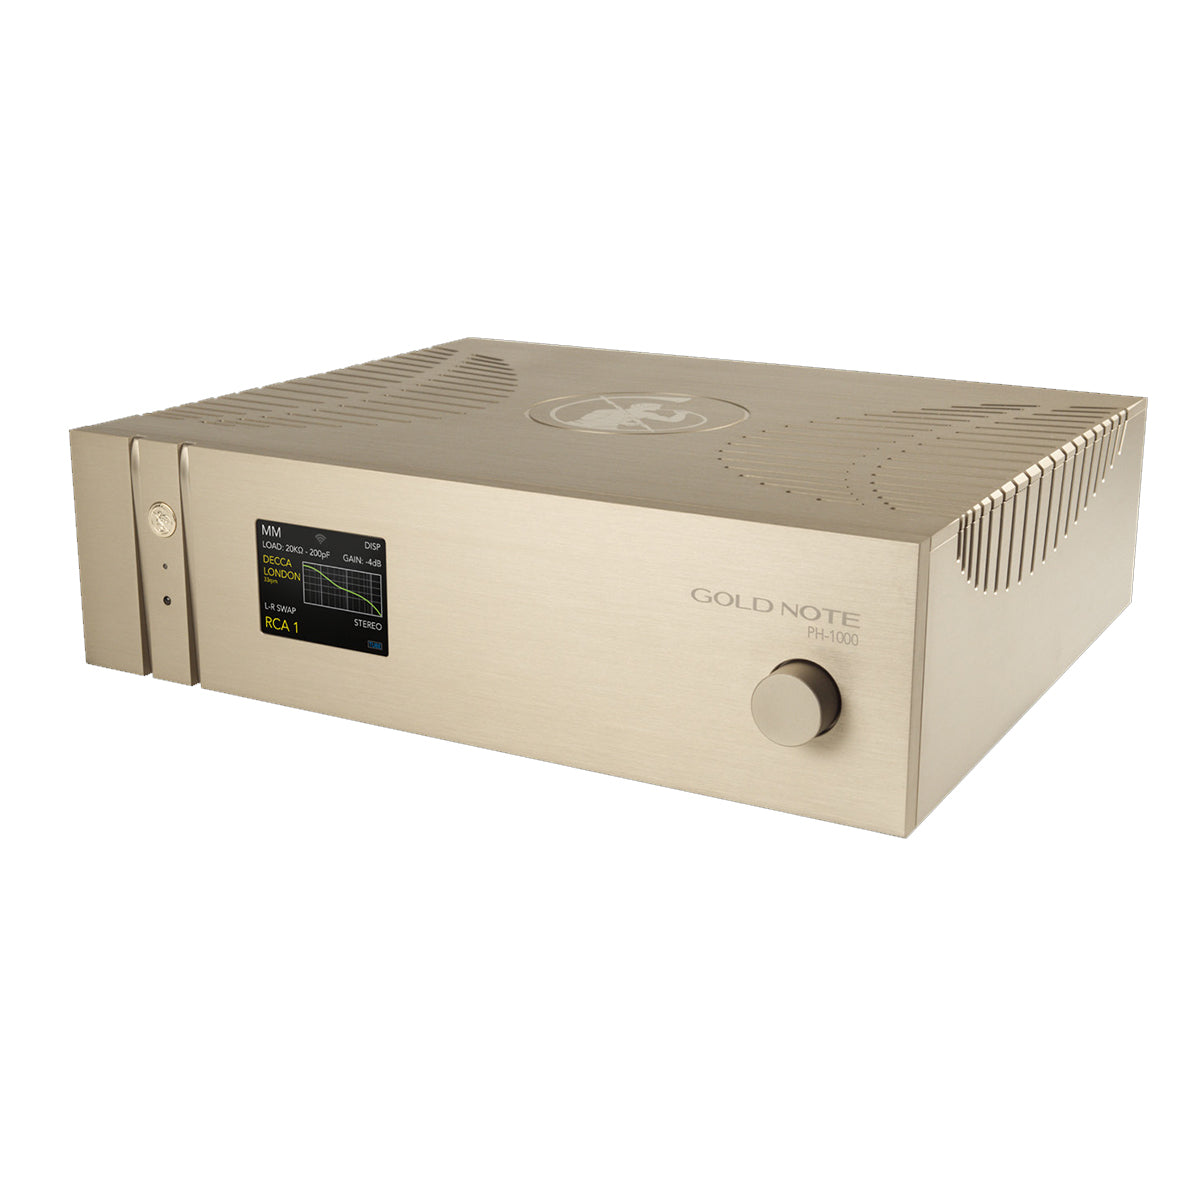 Gold Note PH-1000  Phono Preamplifier/Preamplifier (available to demo)